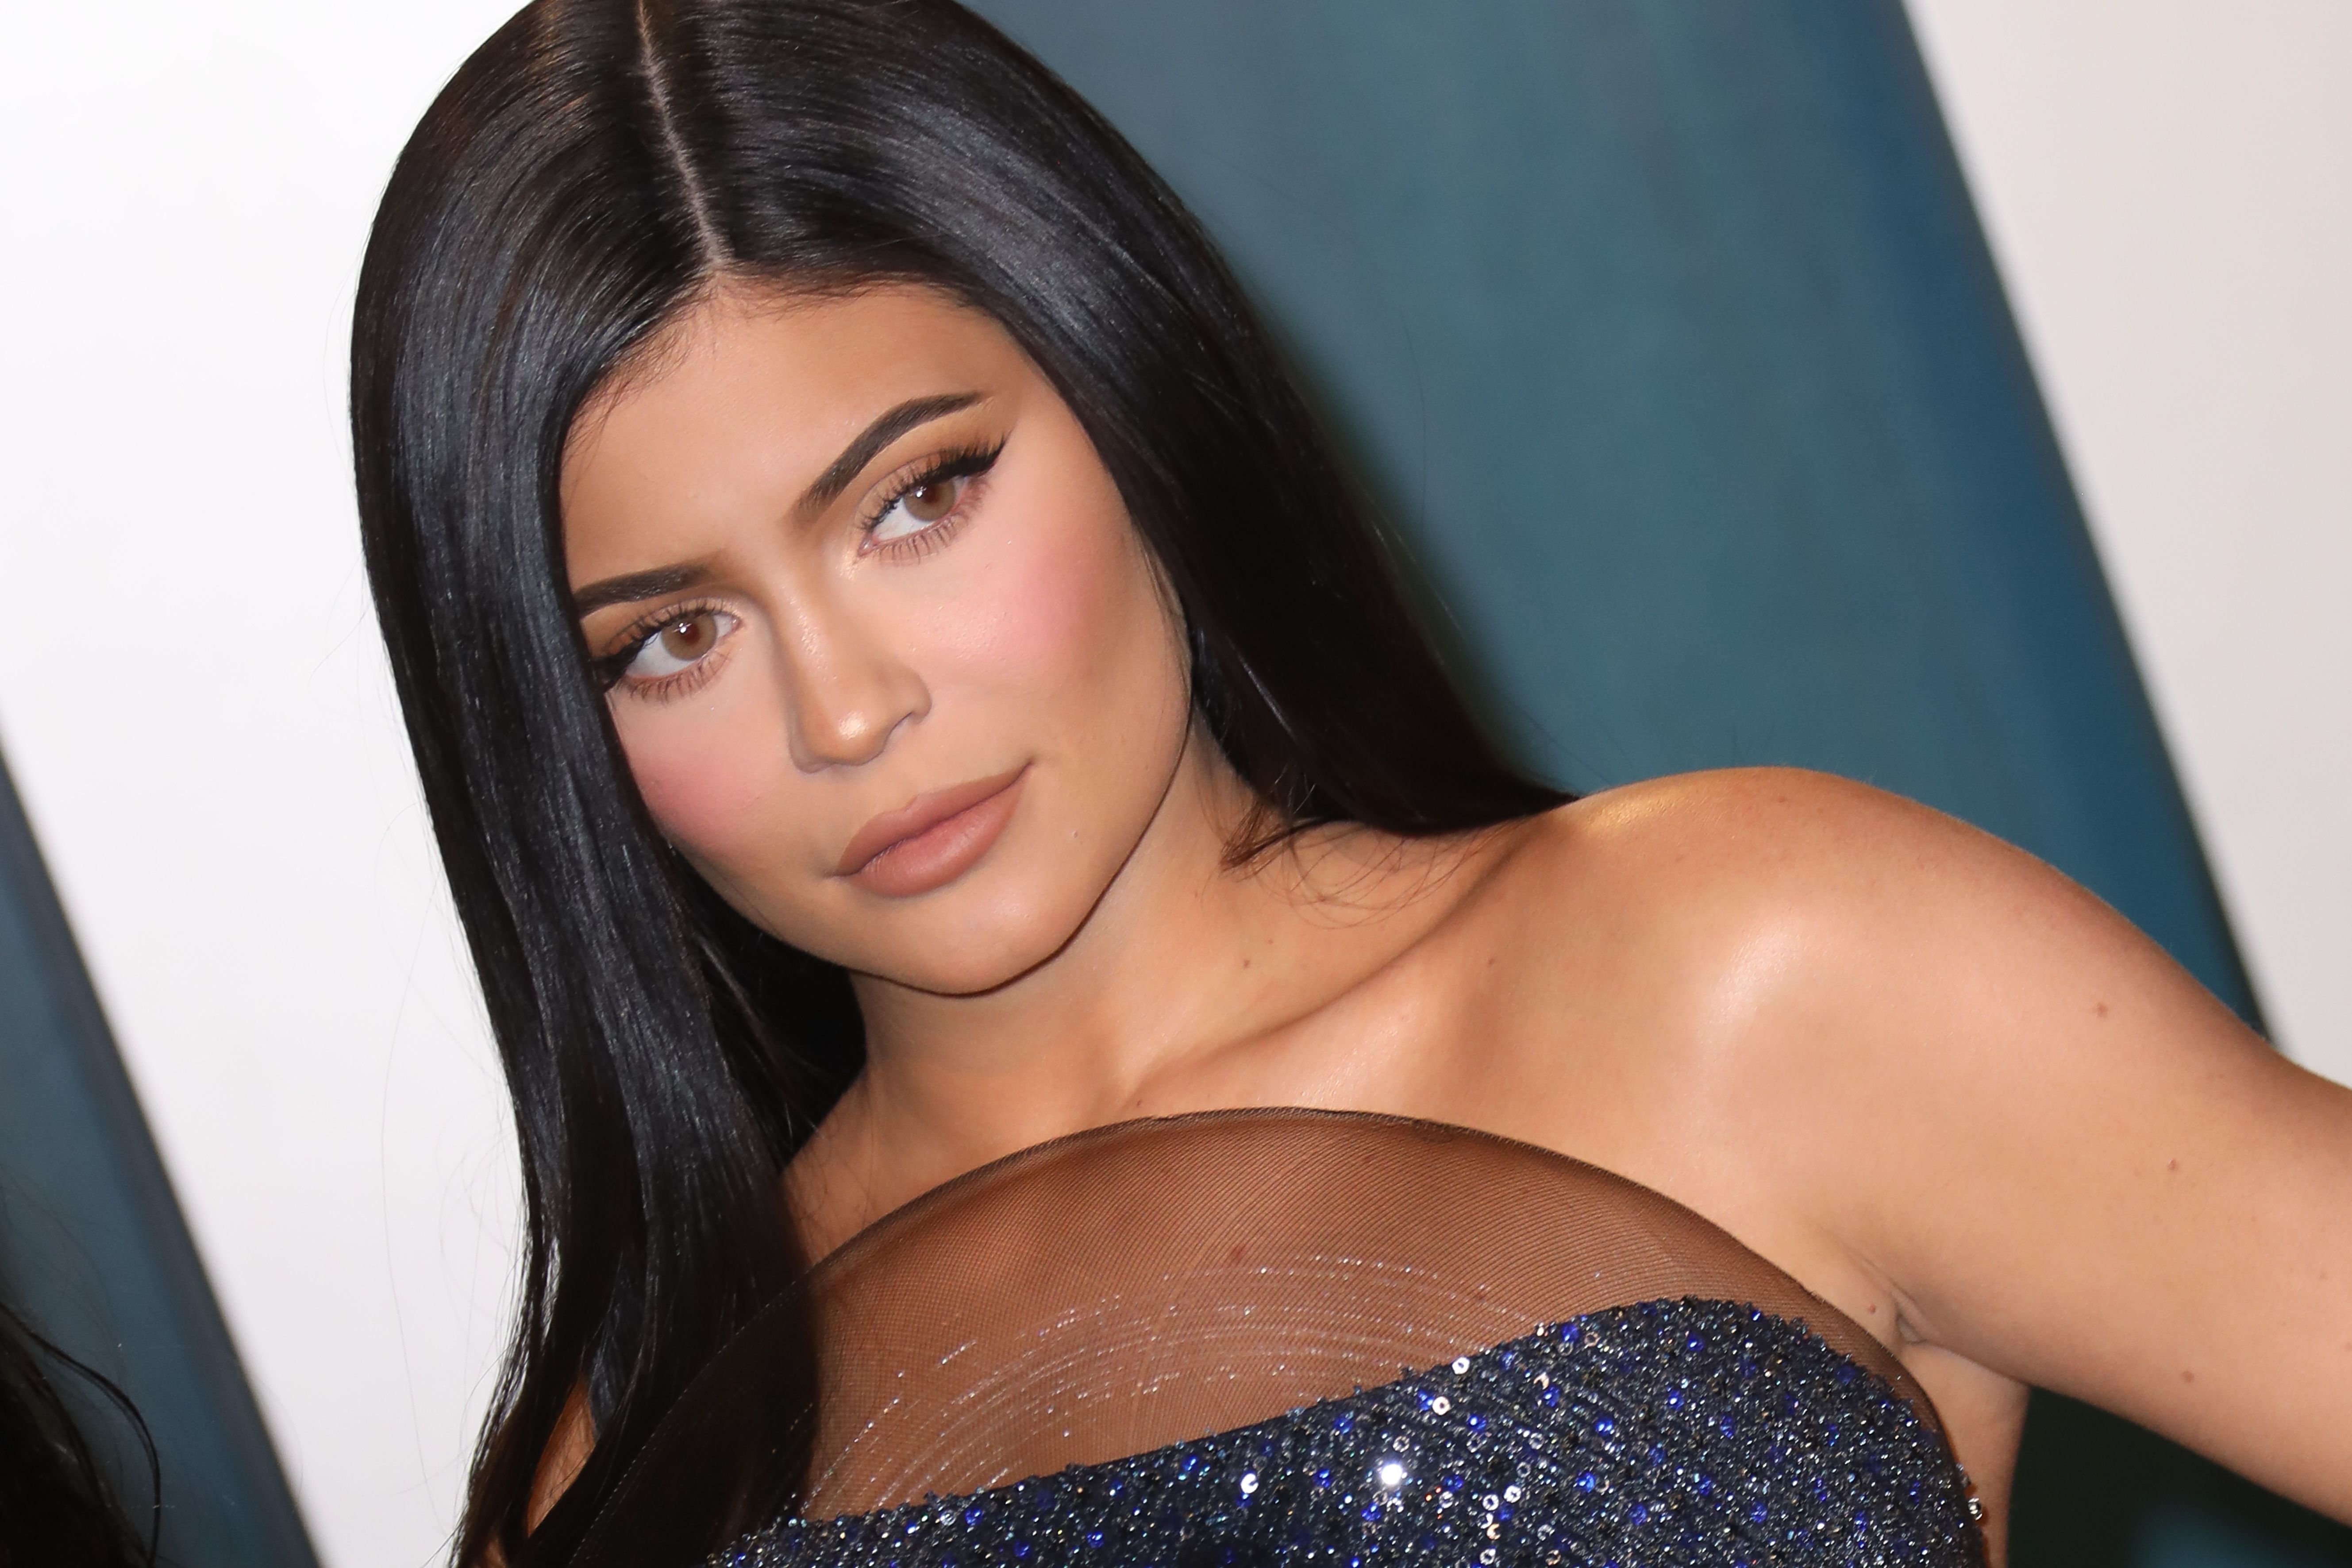 Kylie Jenner just posed topless with nothing but gold body paint